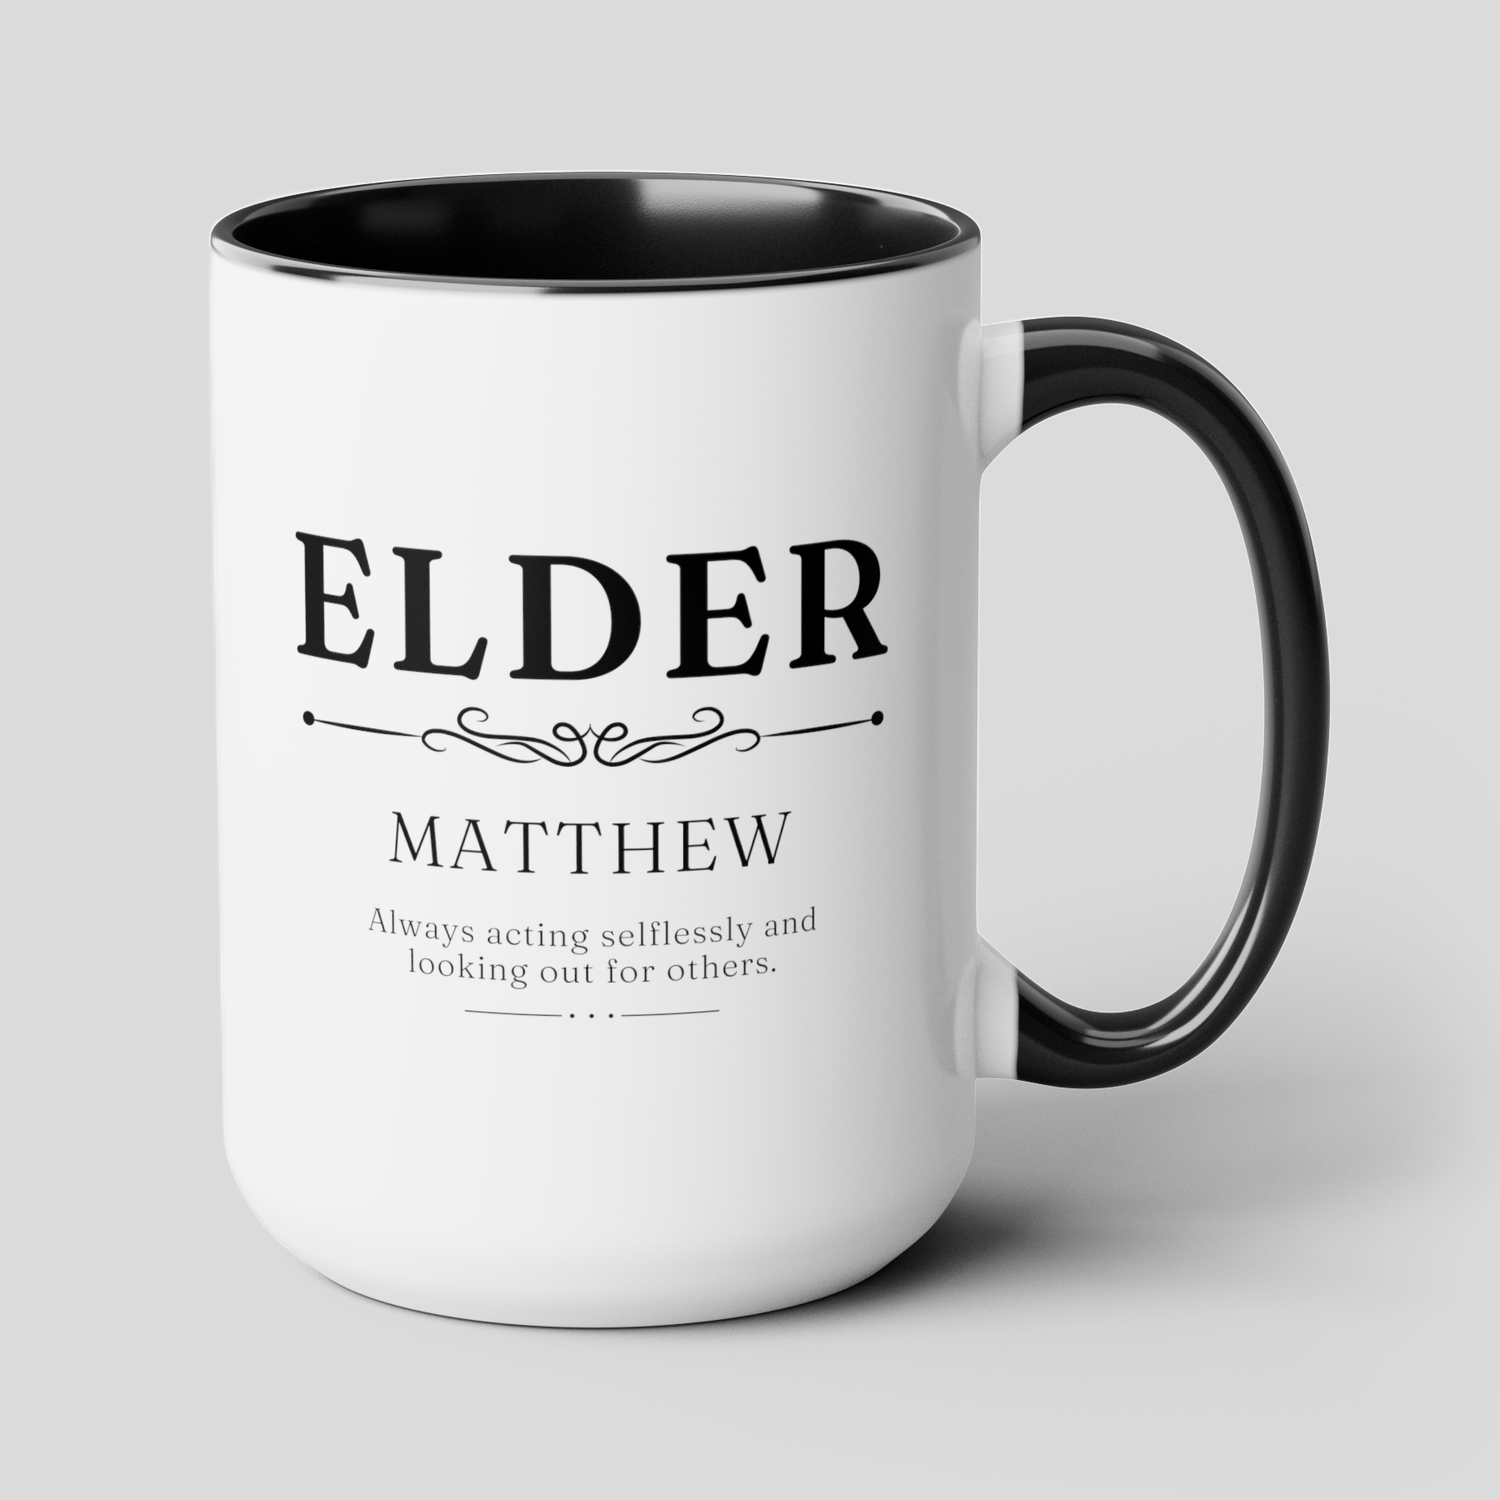 Elder Name 15oz white with black accent funny large coffee mug gift for JW elders custom name phrase personalize waveywares wavey wares wavywares wavy wares cover